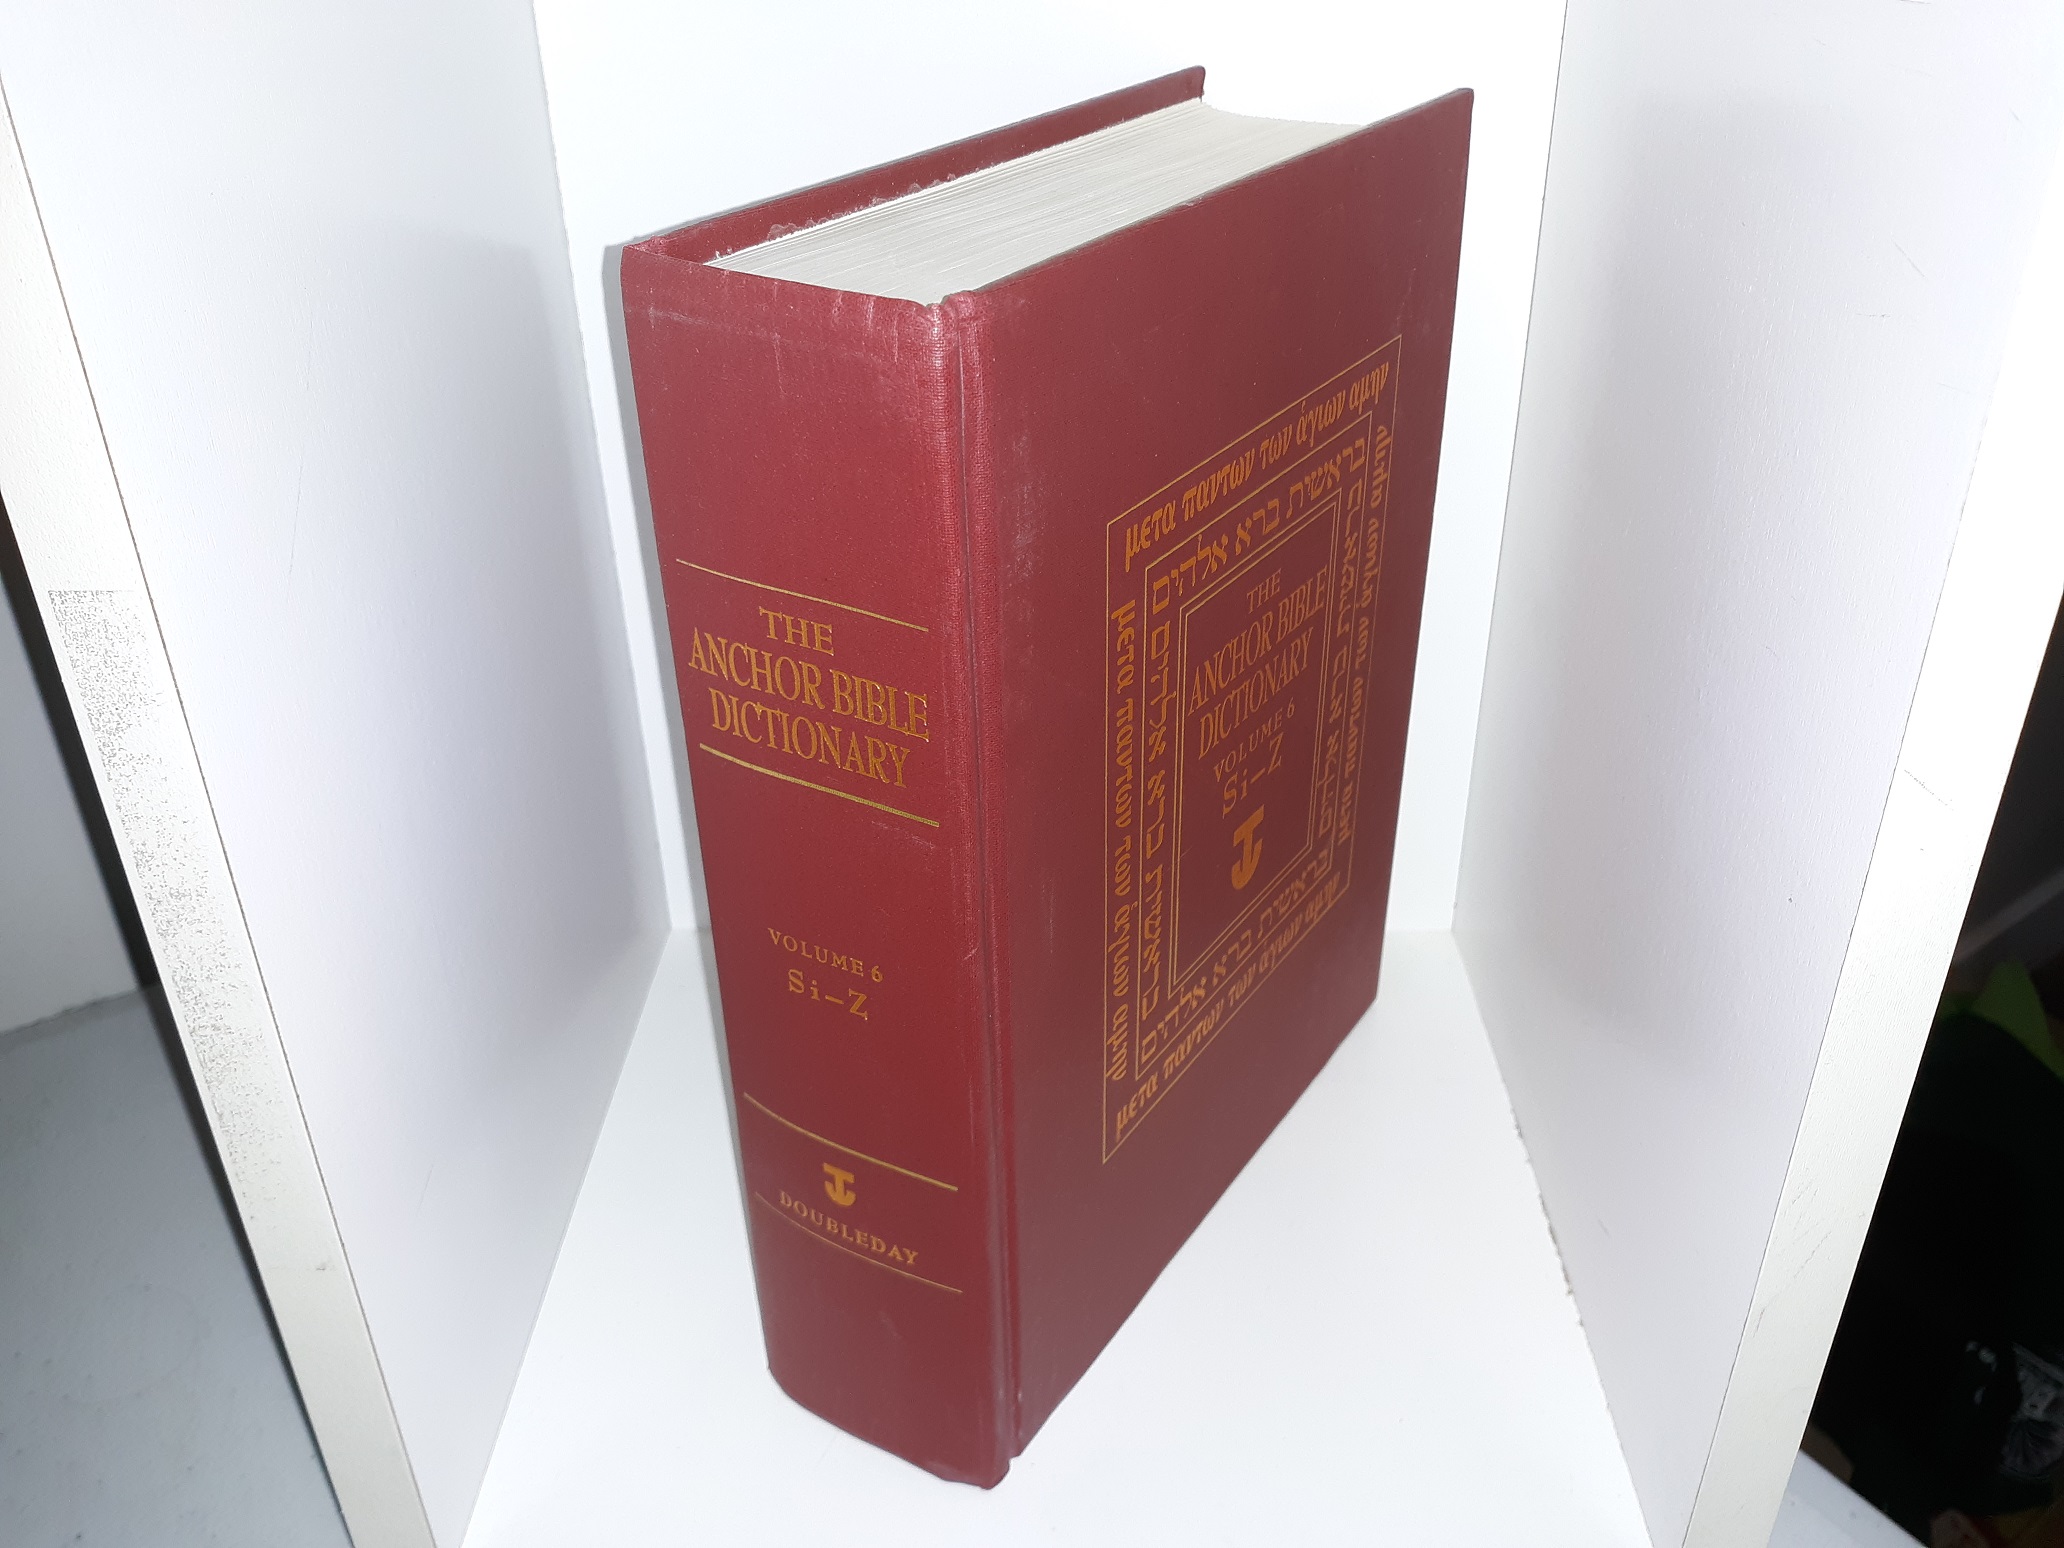 The Anchor Bible Dictionary Vol 6 Si Z 1992 ~ Edited By David Noel Freedman Eborn Books 4694